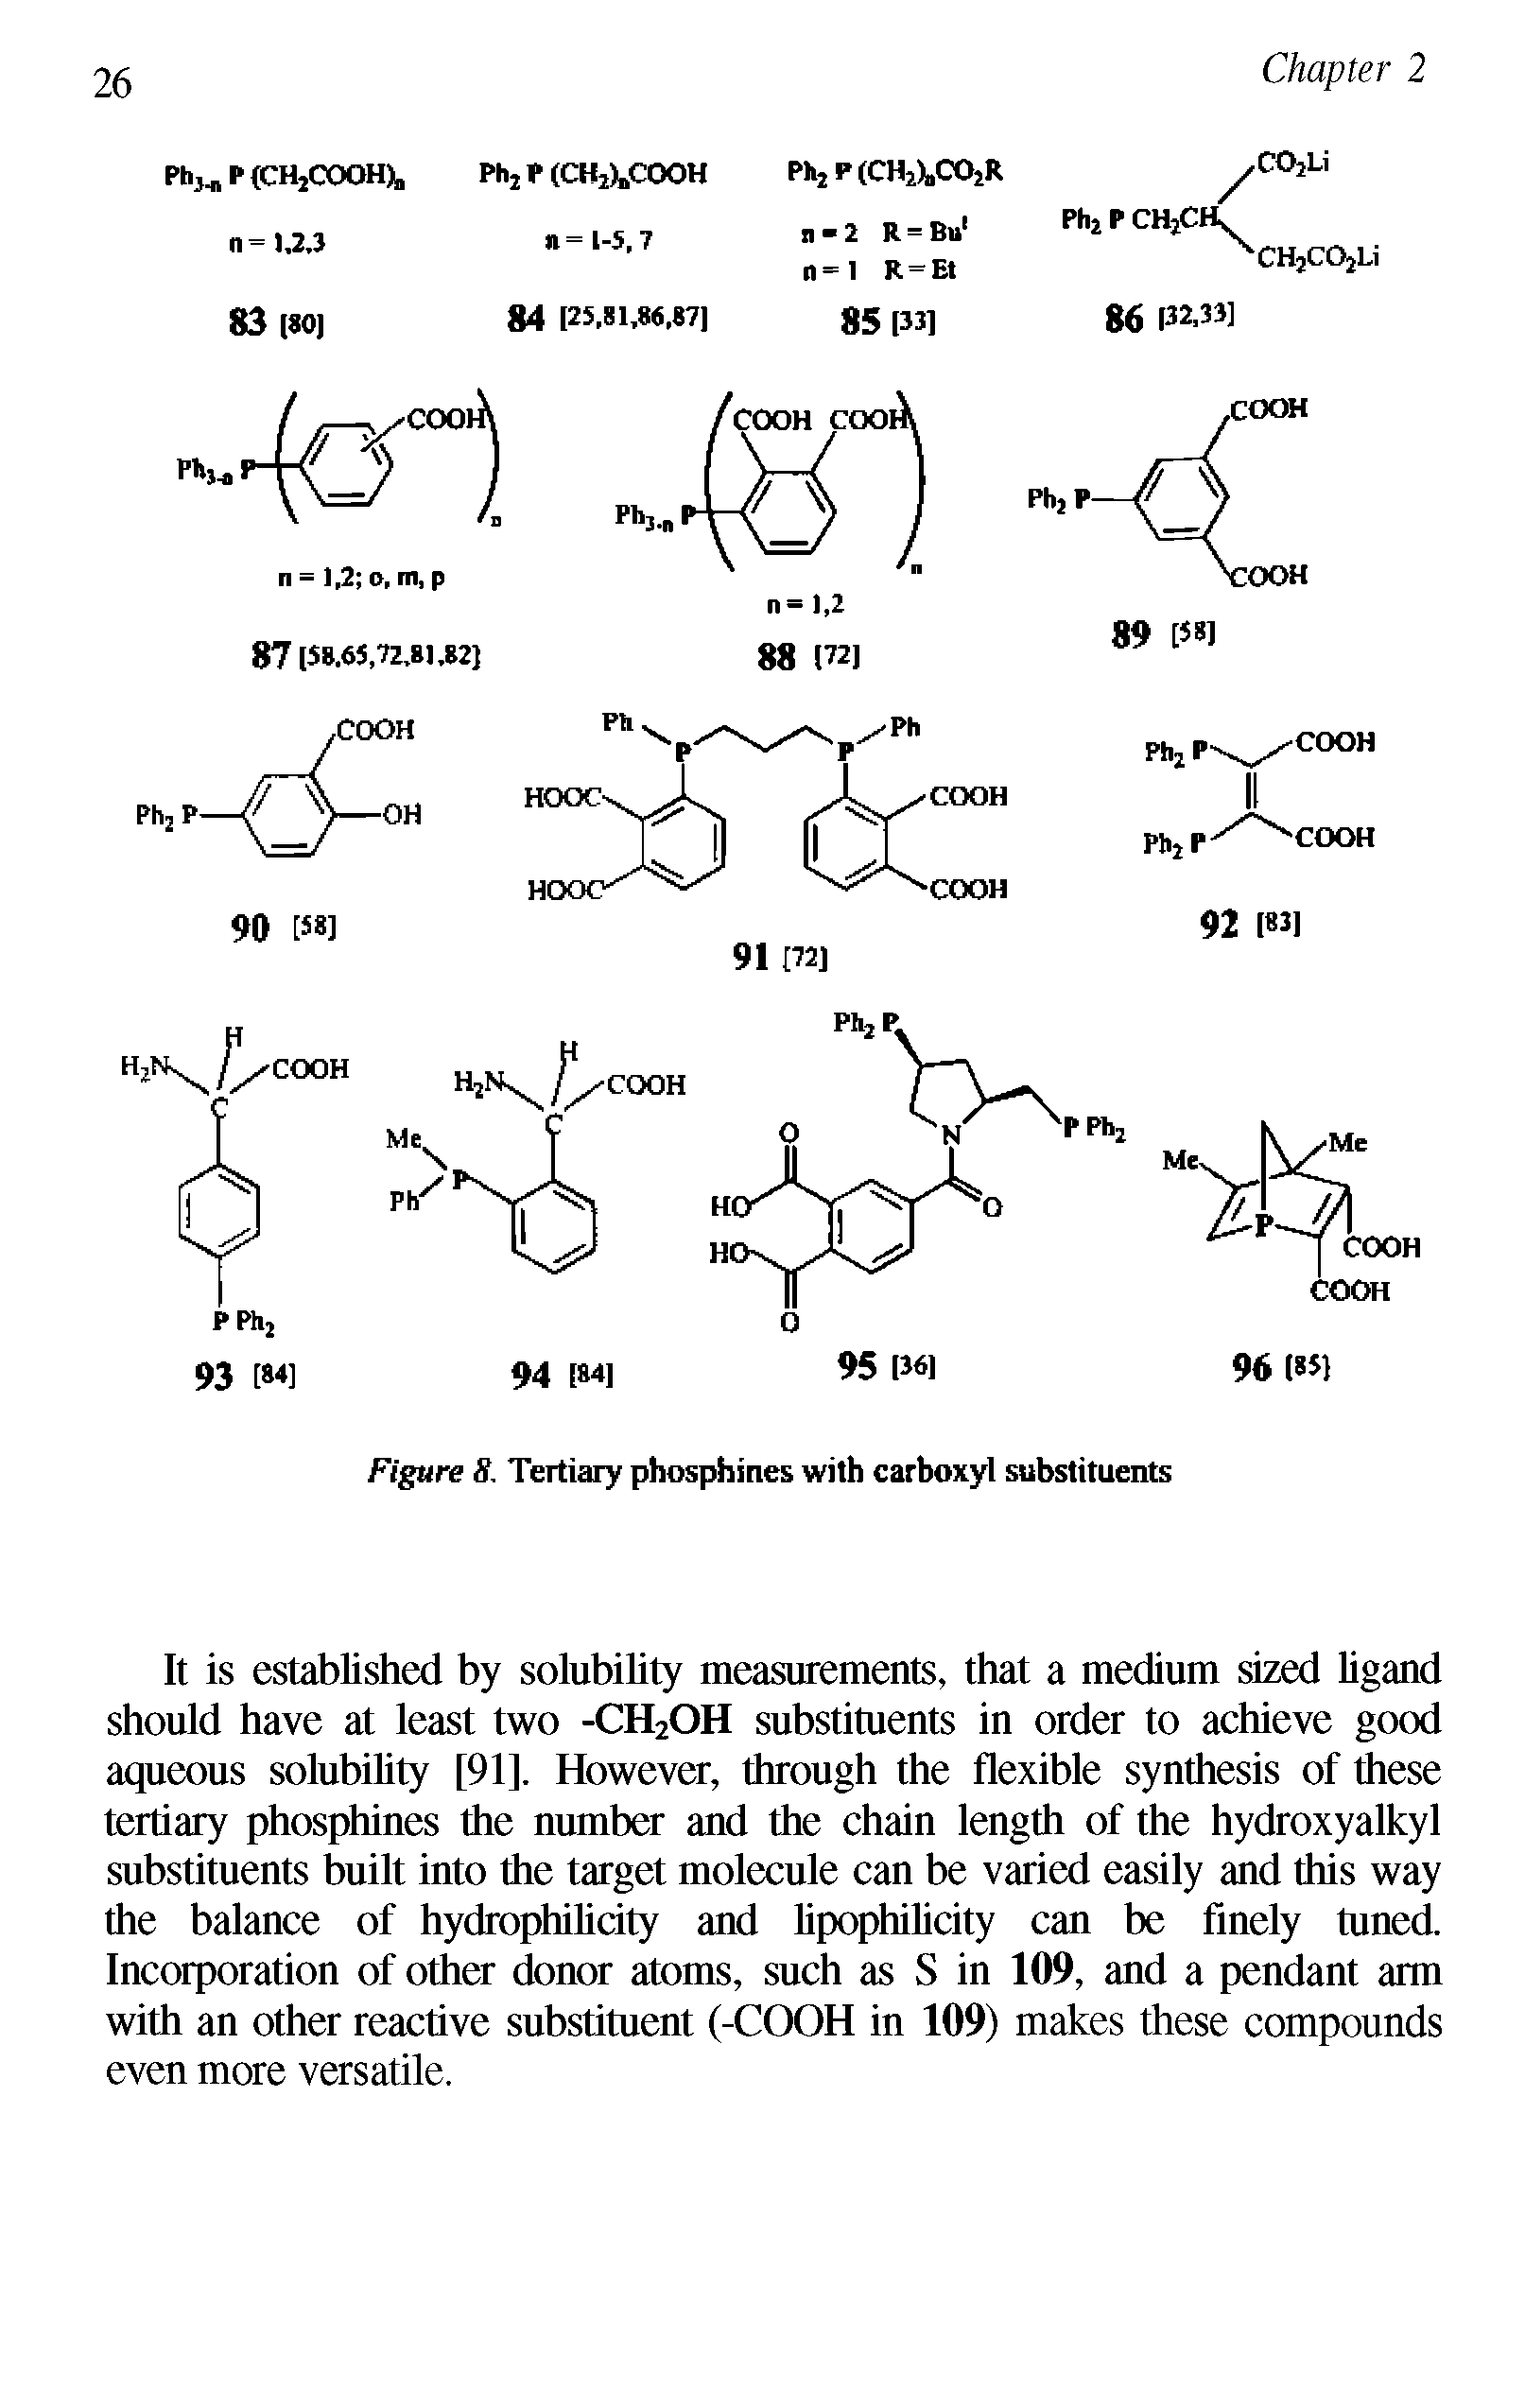 Figure 8. Tertiary phosphines with carboxyl substituents...